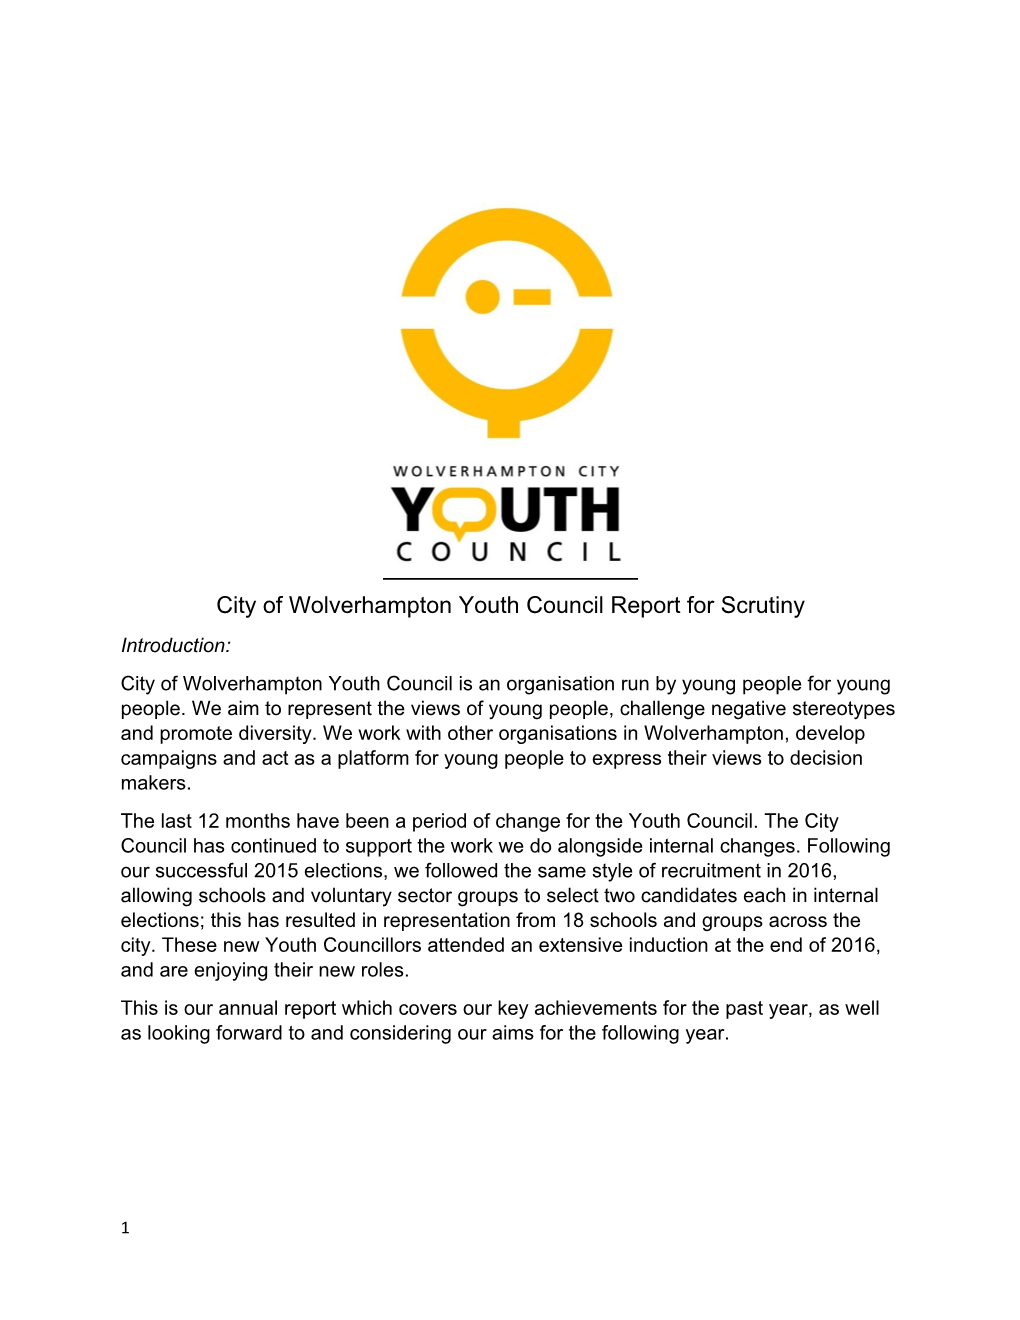 City of Wolverhampton Youth Council Report for Scrutiny Introduction: City of Wolverhampton Youth Council Is an Organisation Run by Young People for Young People